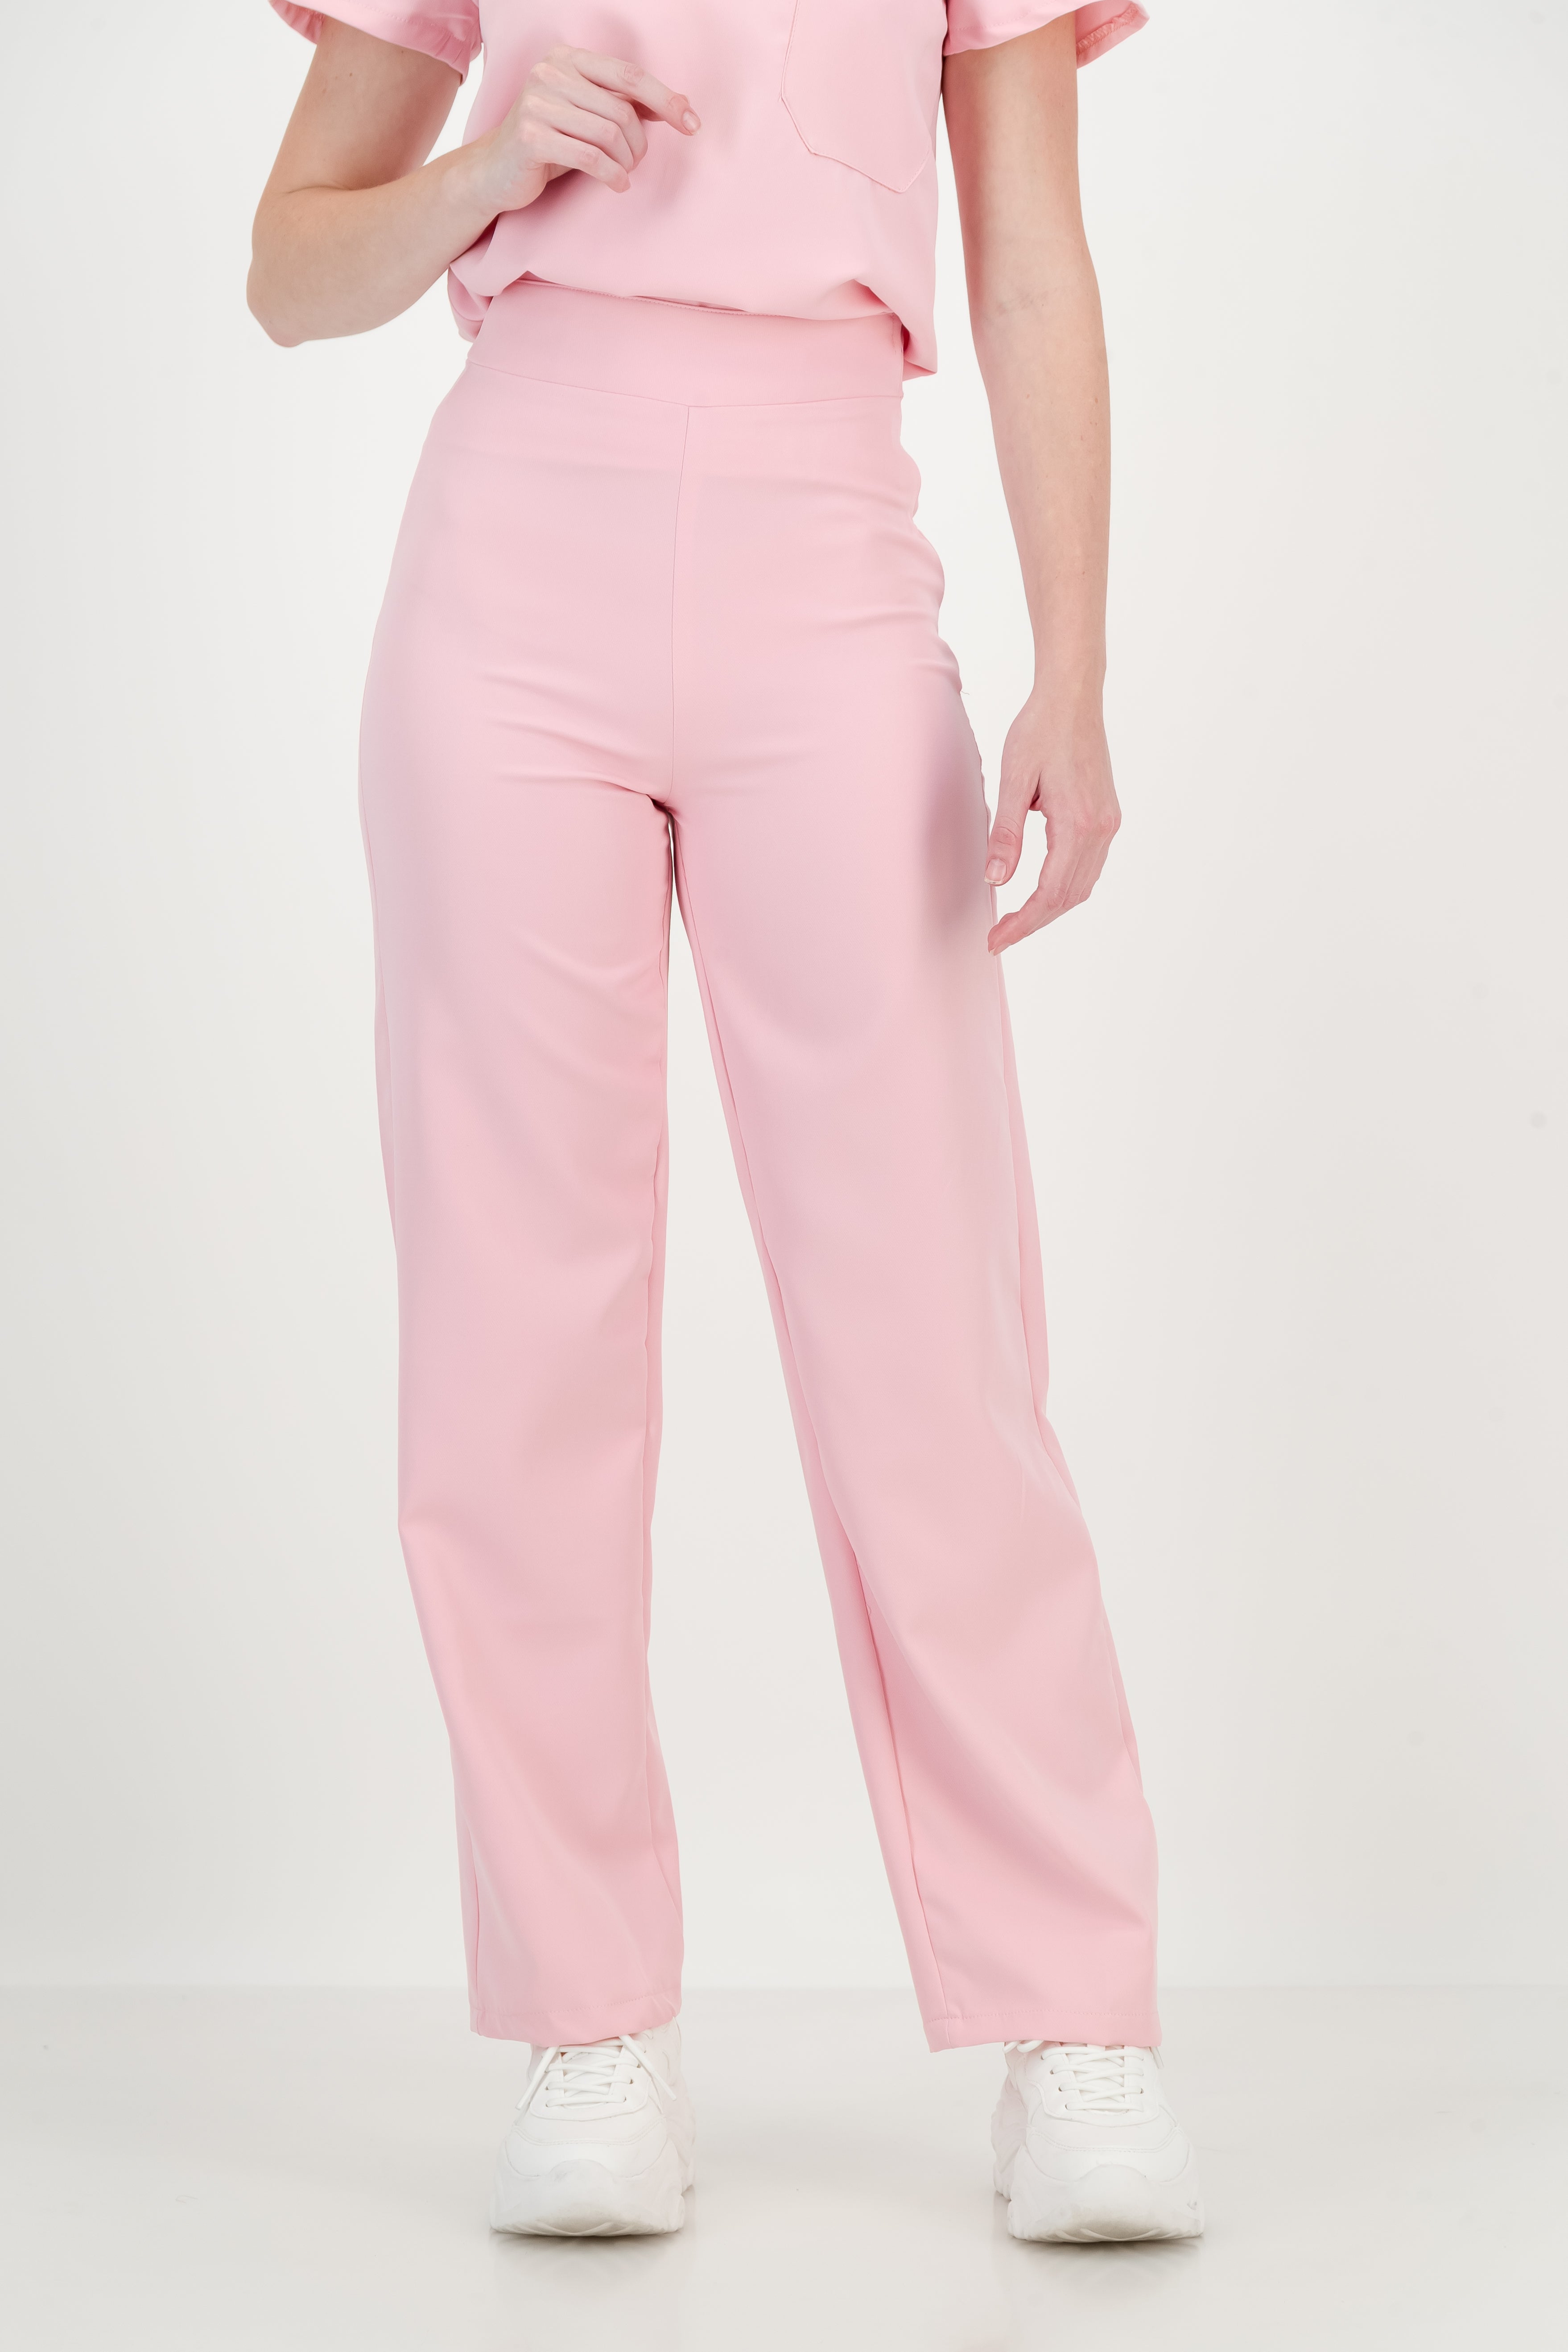 Buy KRAUS Baby Pink Solid Cotton Relaxed Fit Women's Casual Pants |  Shoppers Stop